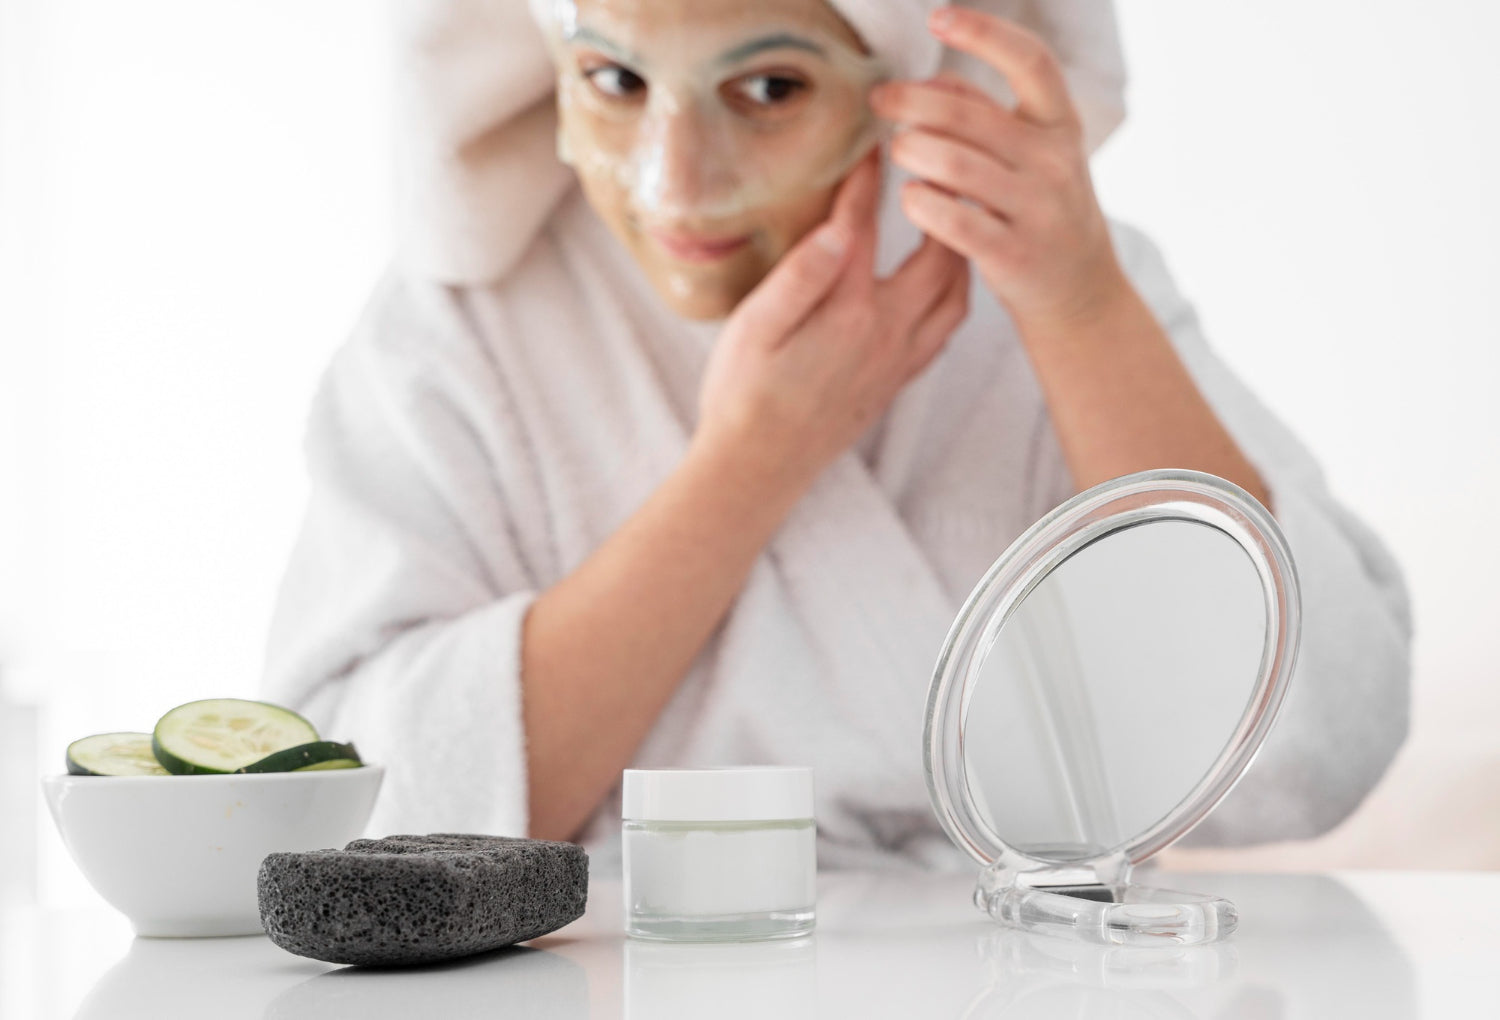 Dermatologist’s Tips: 8 Tips For Using Skin Care Products